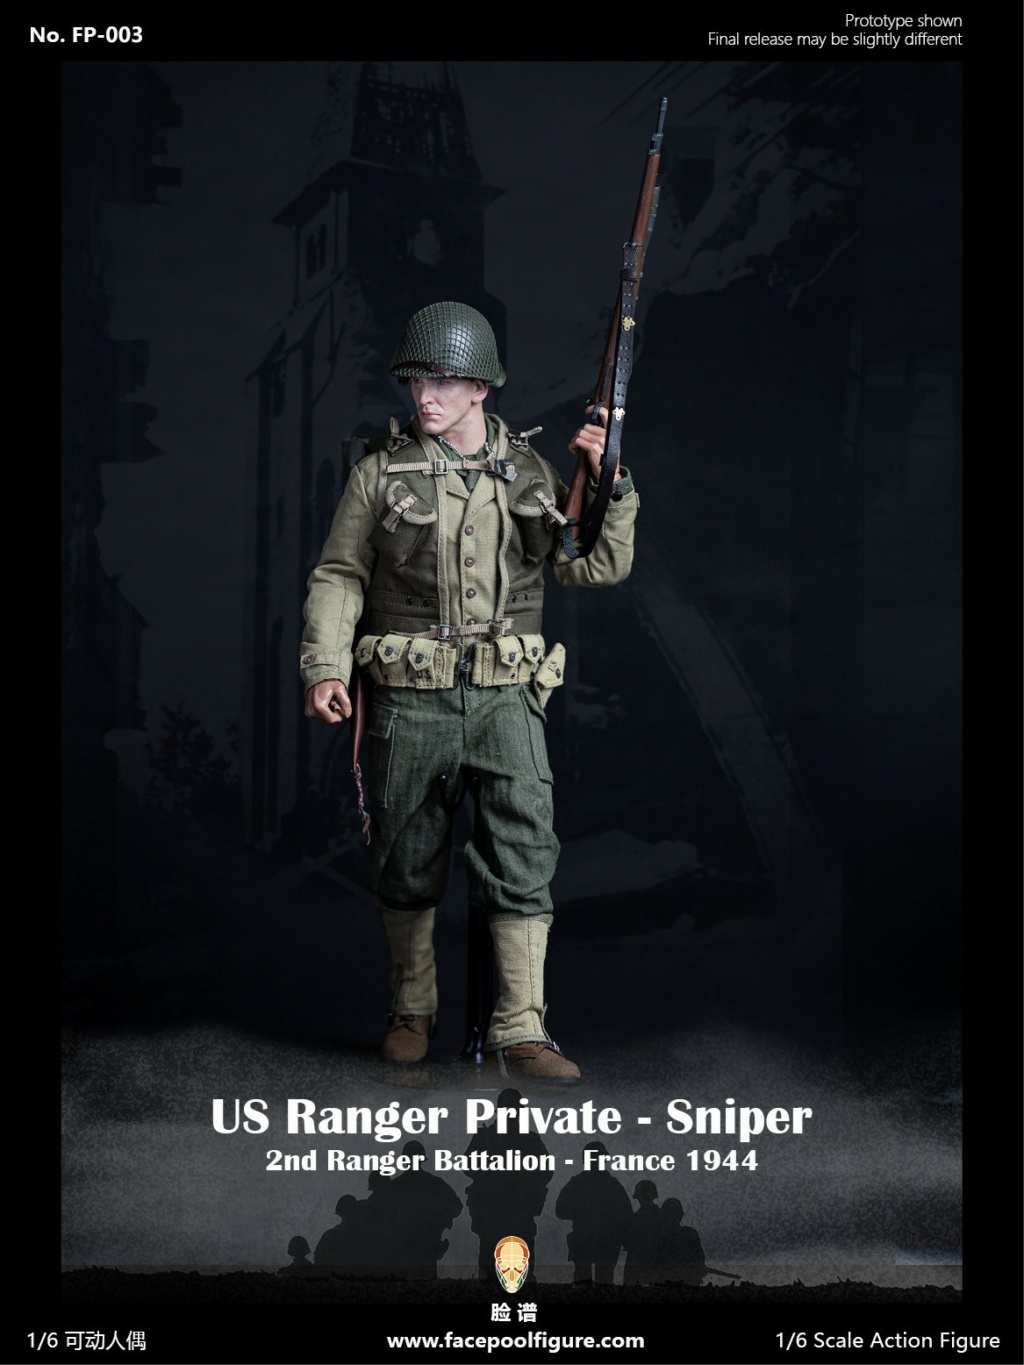 WWII - NEW PRODUCT: Facepool: 1/6 WWII Ranger Sniper FP003-Double-headed sculpture + bell tower platform  09151210